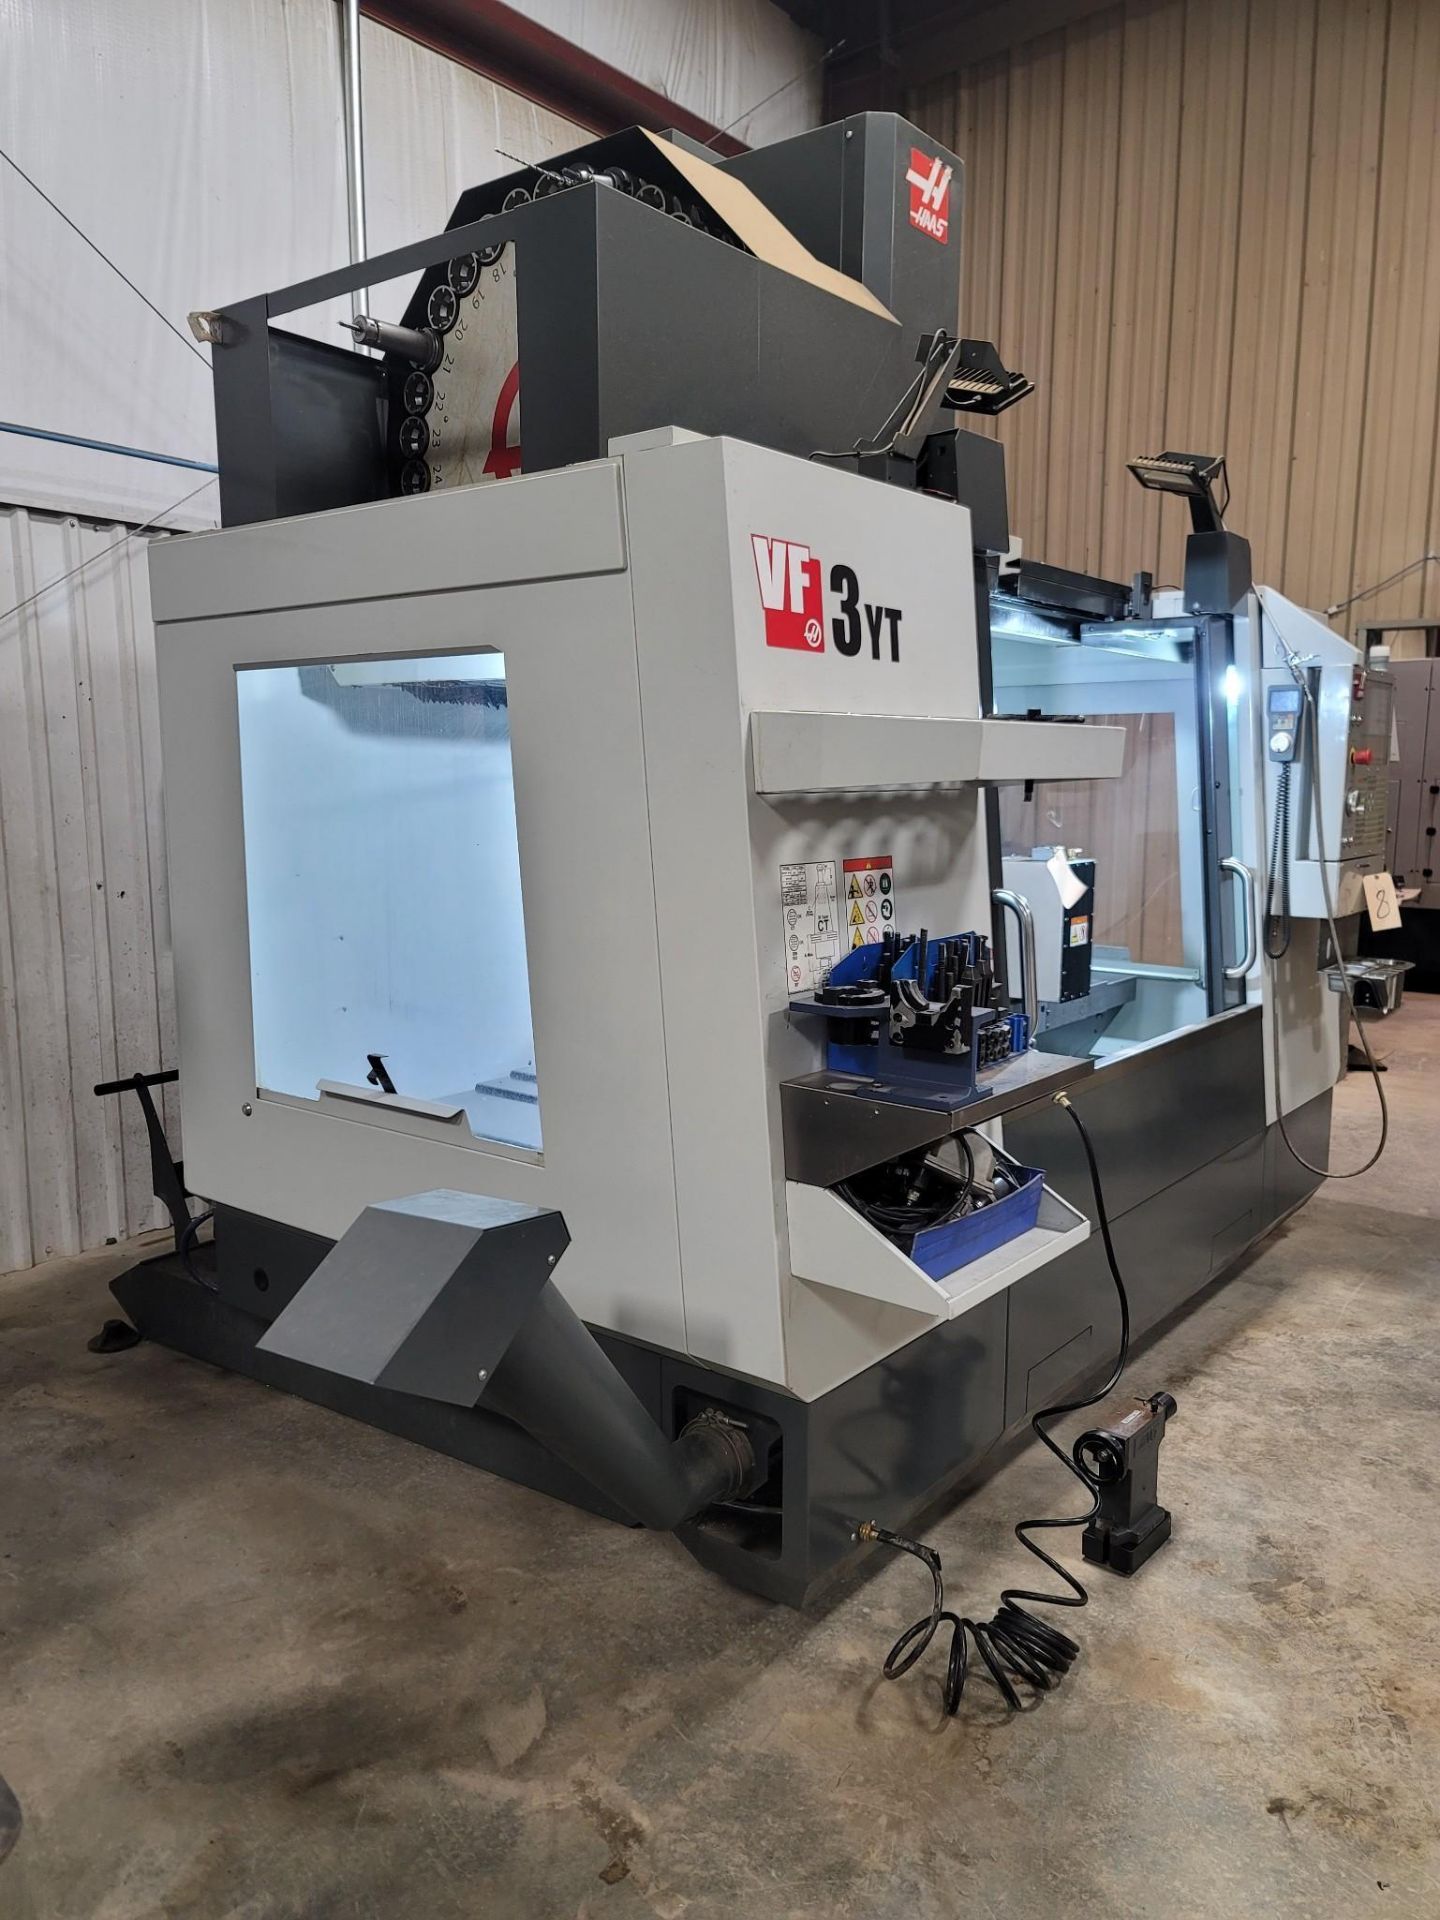 2019, Haas VF 3YT/ 50 Vertical Machining Center, VMC, S/N 1167708 - Image 2 of 42